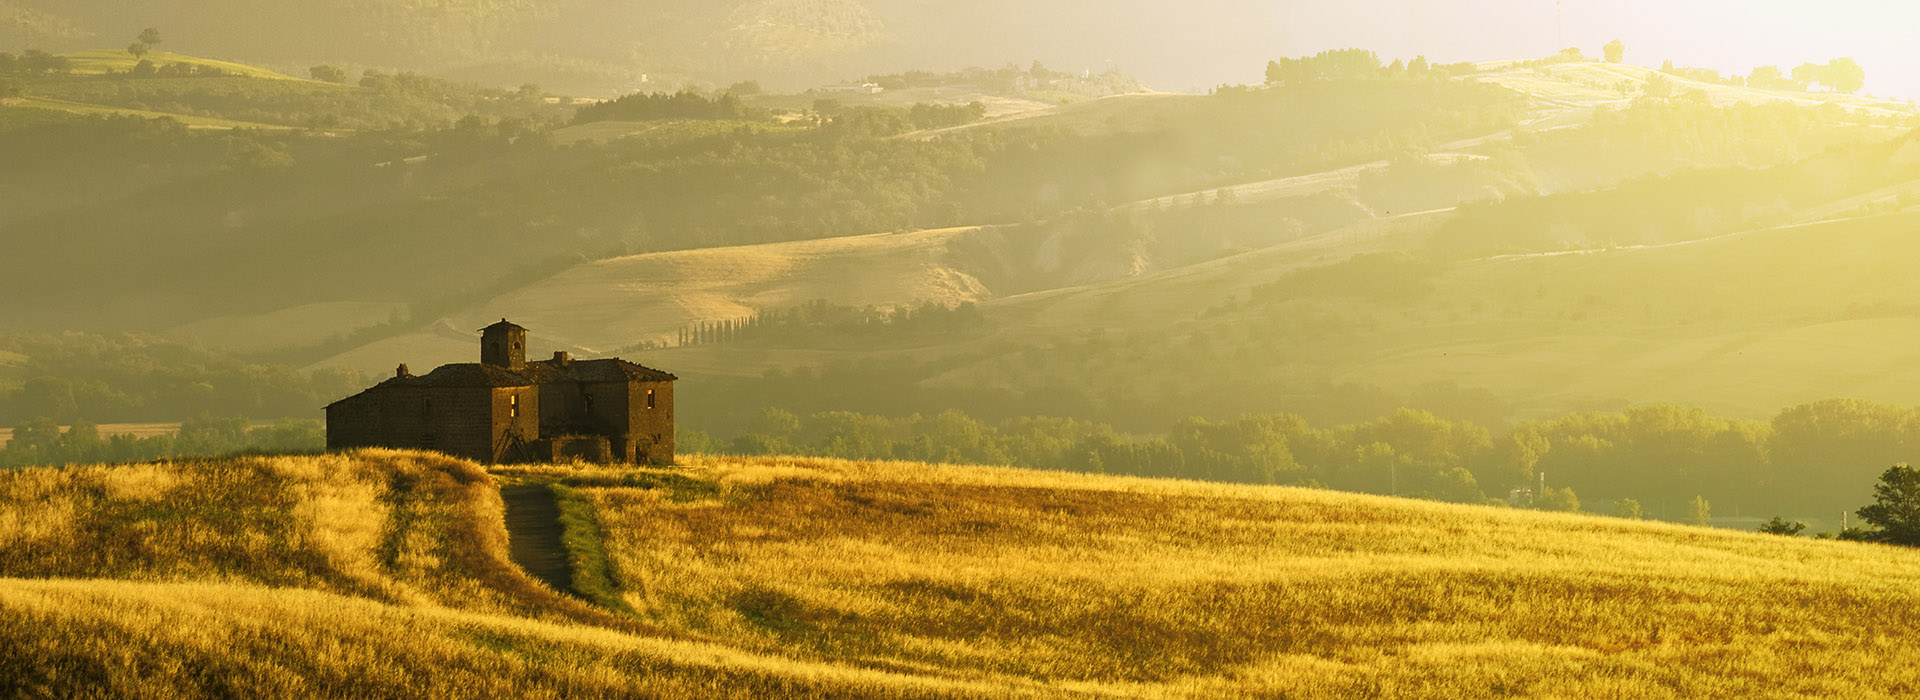 Umbria, Italy - An old ruined country house on the top of the hill in a sunny morning.